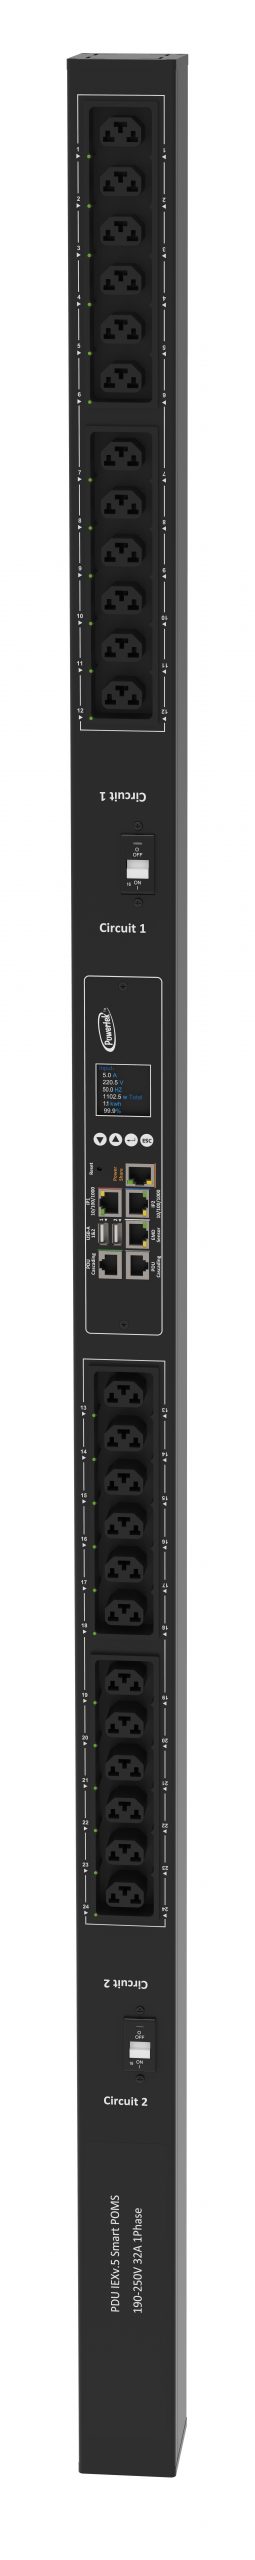 IPDU Per Outlet Switched